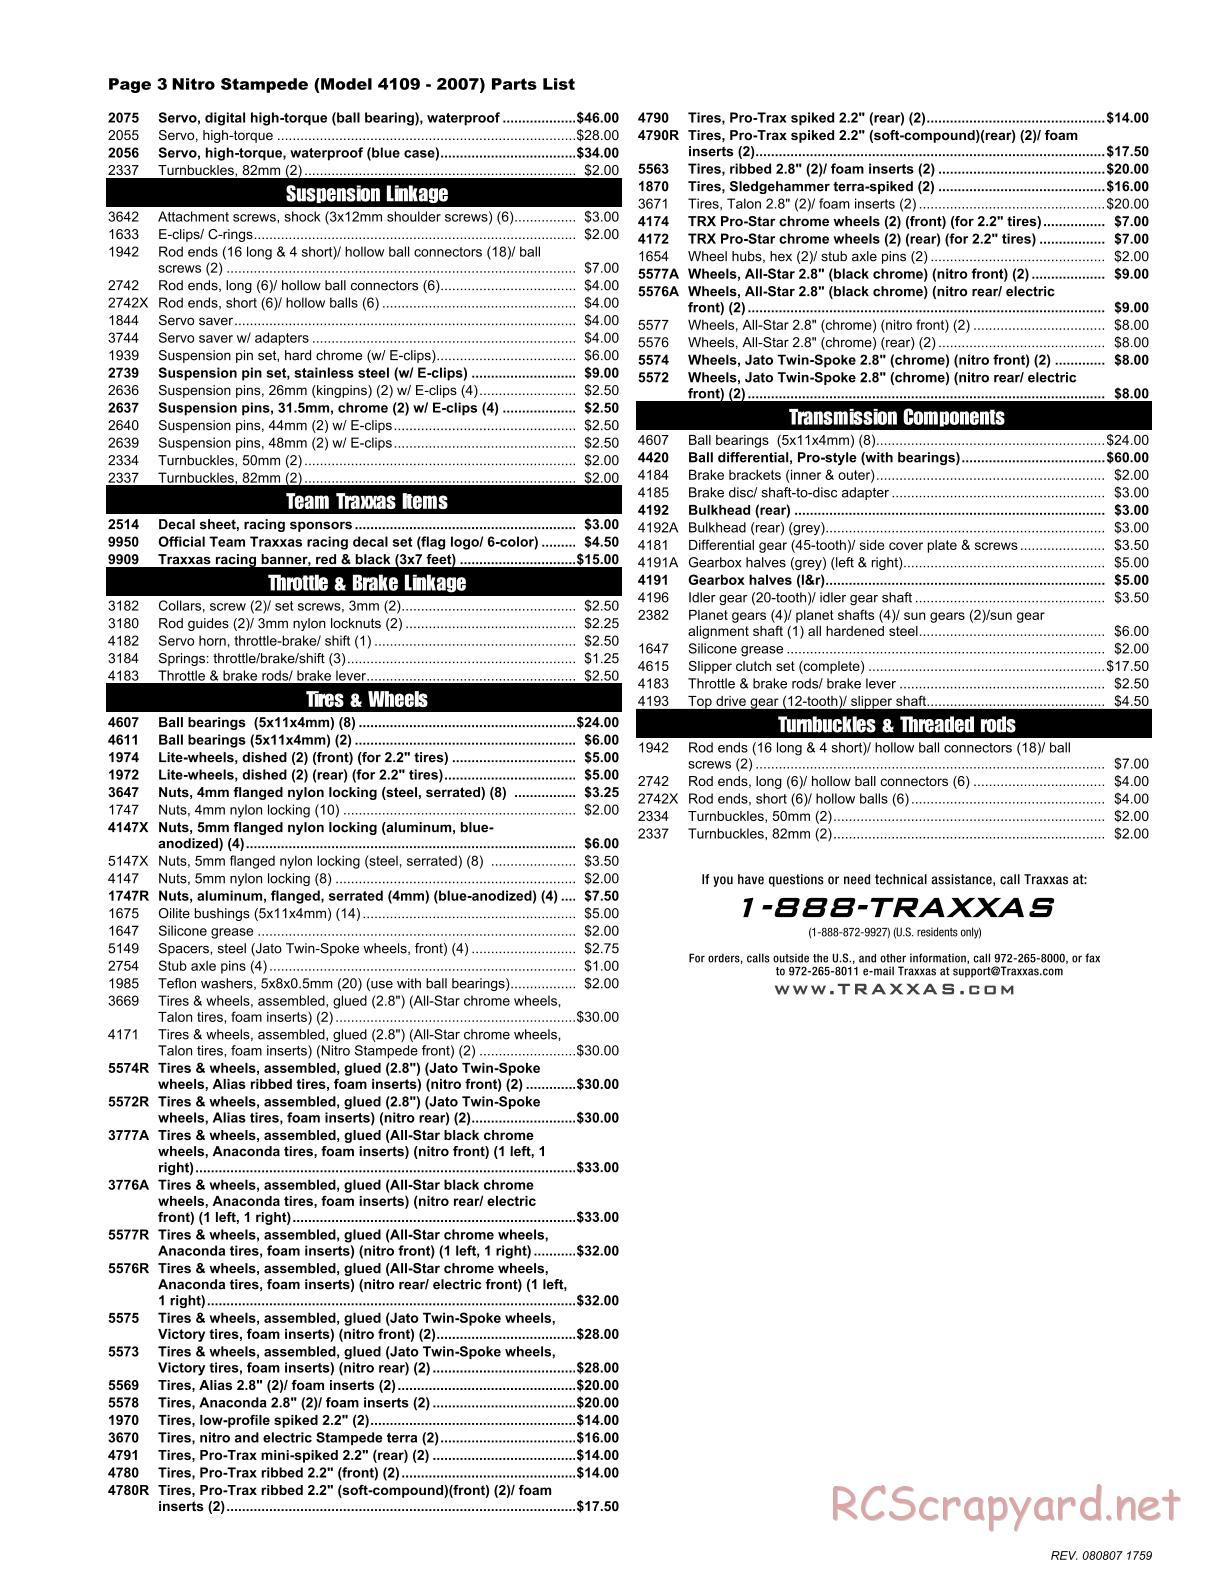 Traxxas - Nitro Stampede (2007) - Parts List - Page 3